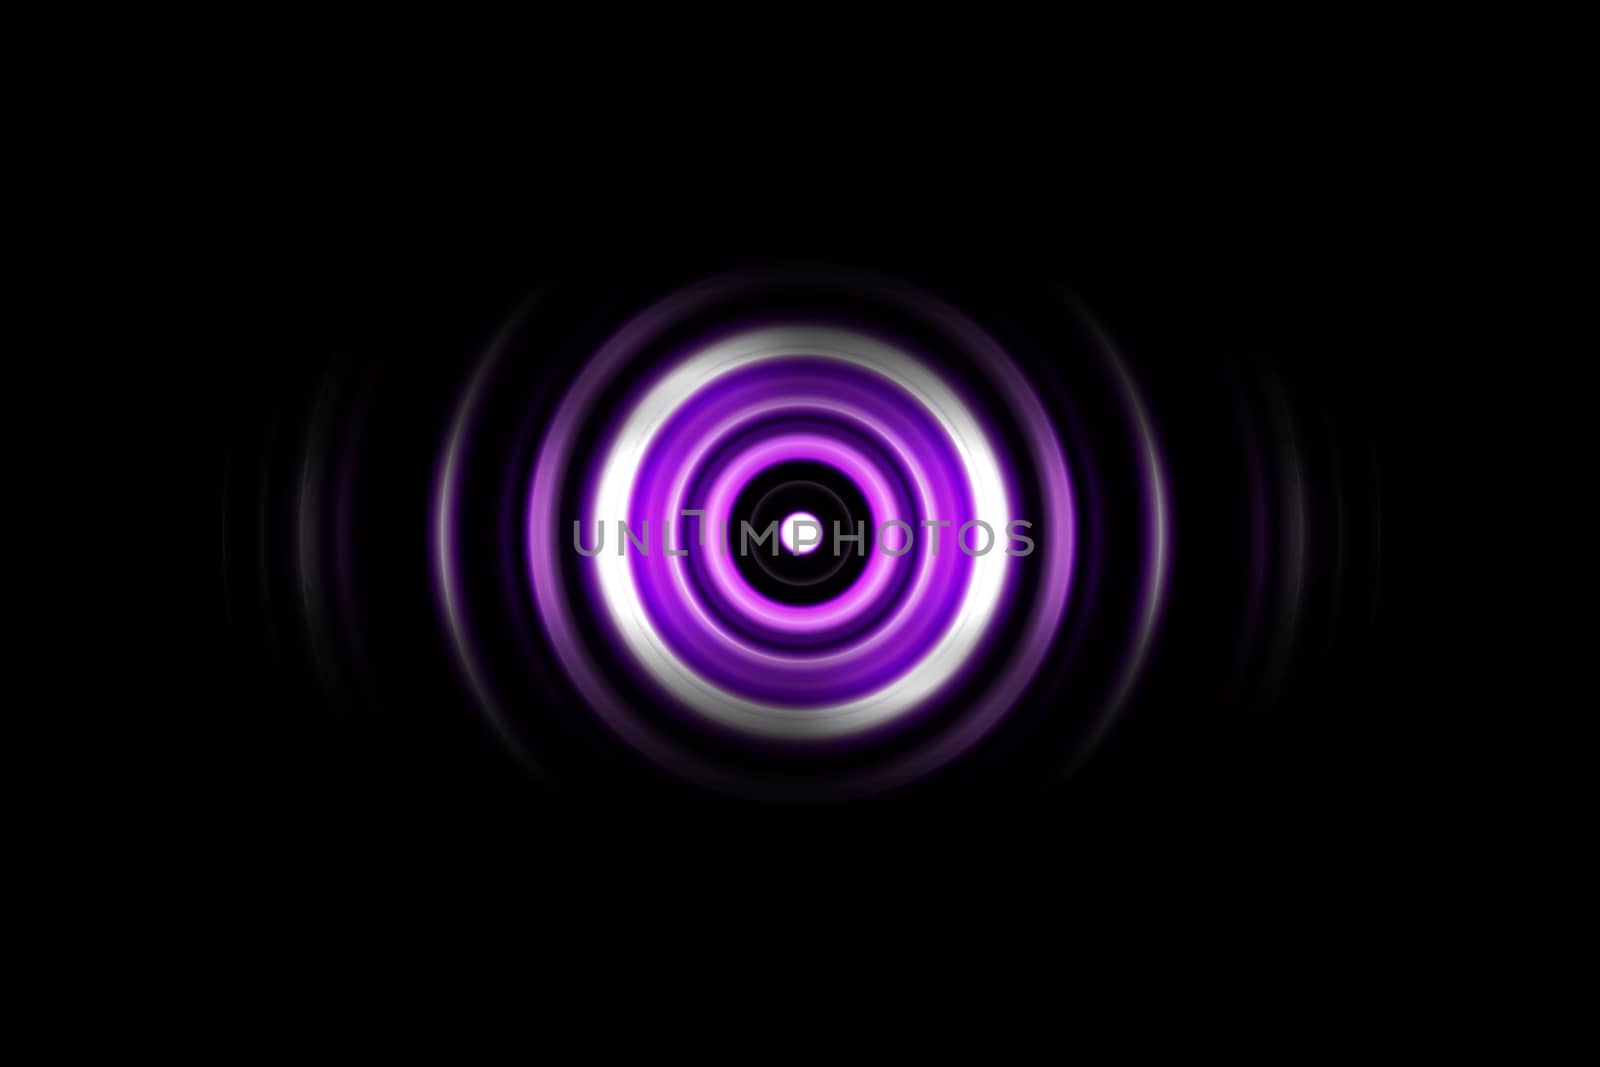 Sound waves oscillating purple light with circle spin abstract b by mouu007